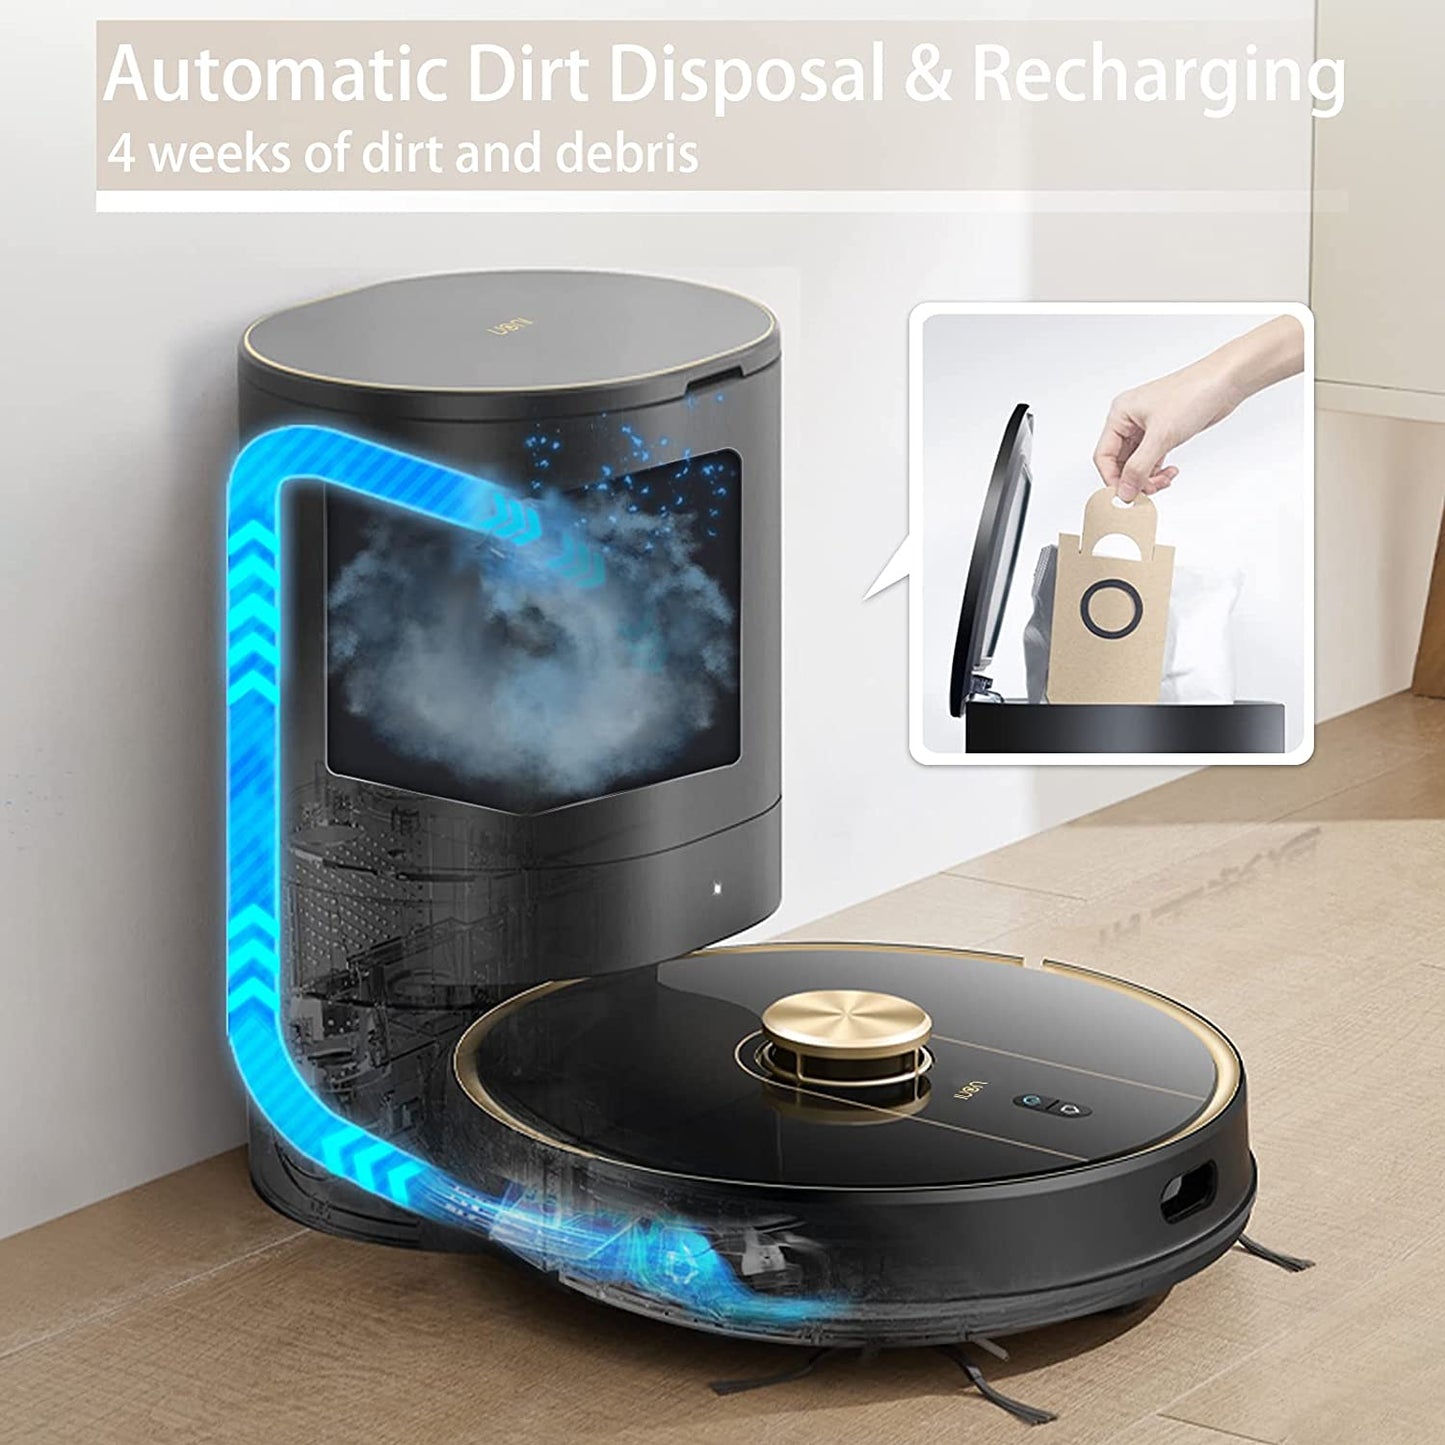 Uoni V980Plus Robot Vacuum Cleaner with Self-Emptying Black With Emptying Bin